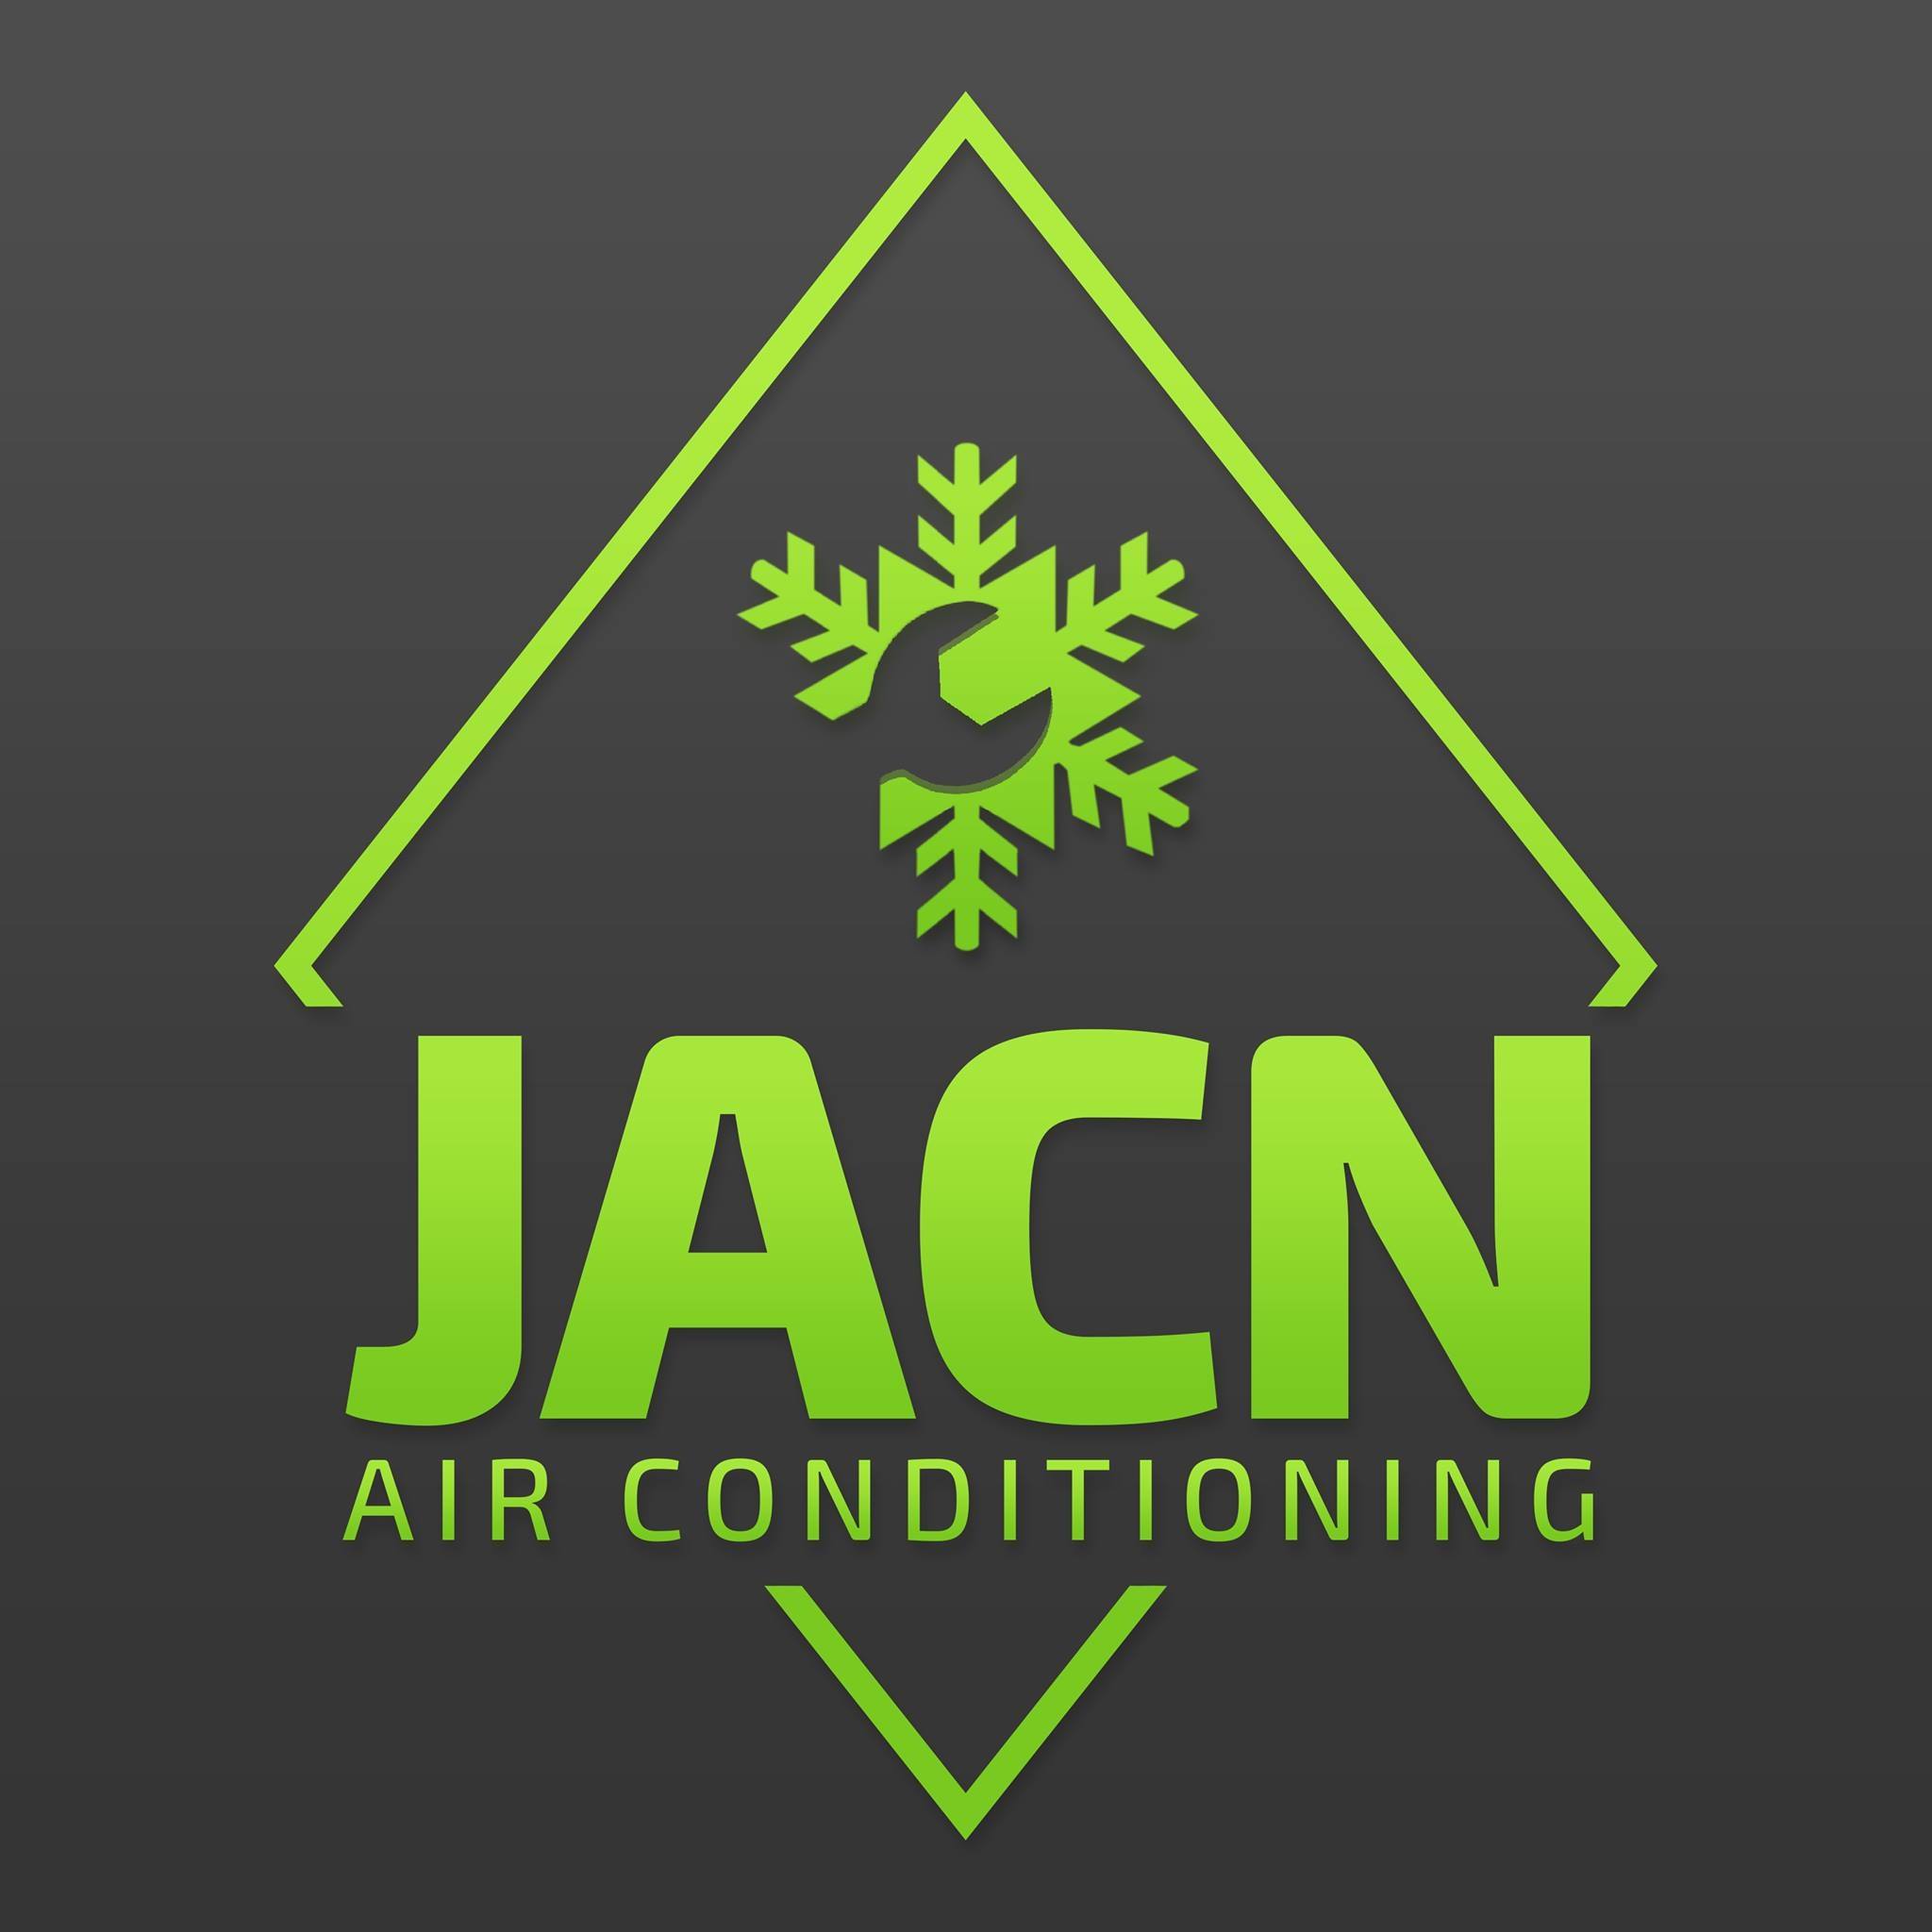 JACN Air Conditioning